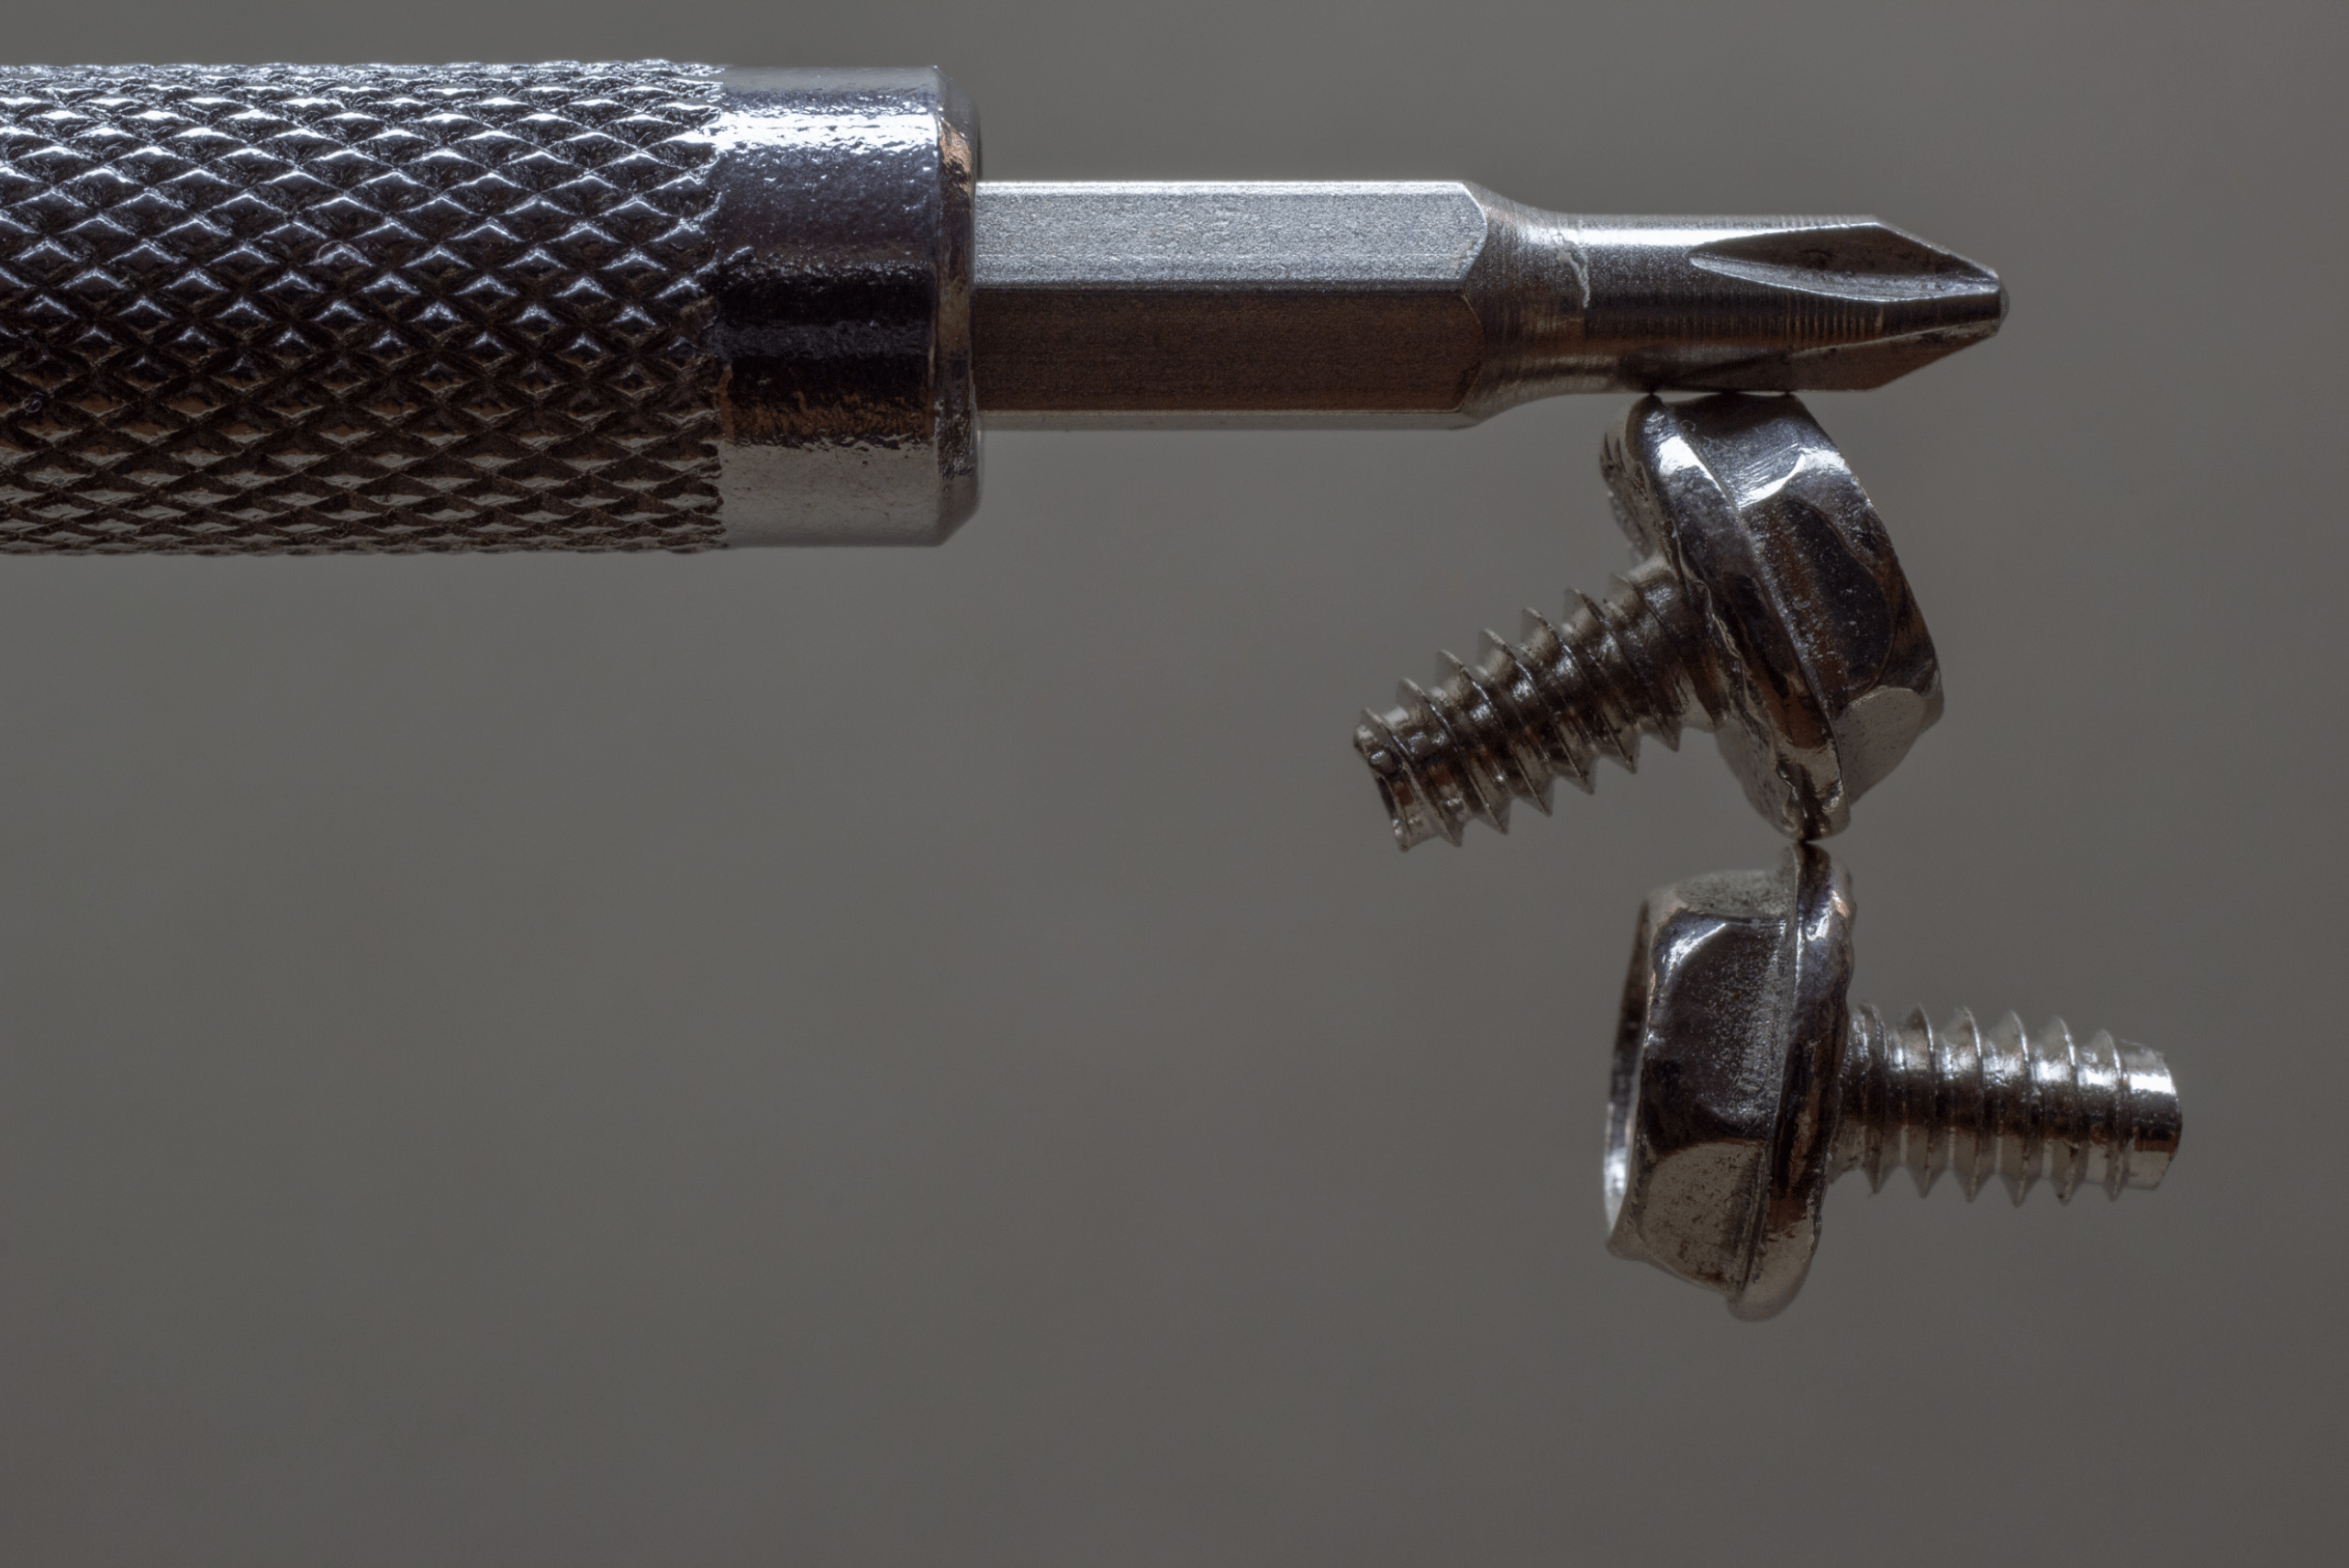 A screwdriver with screws attached to its bit.